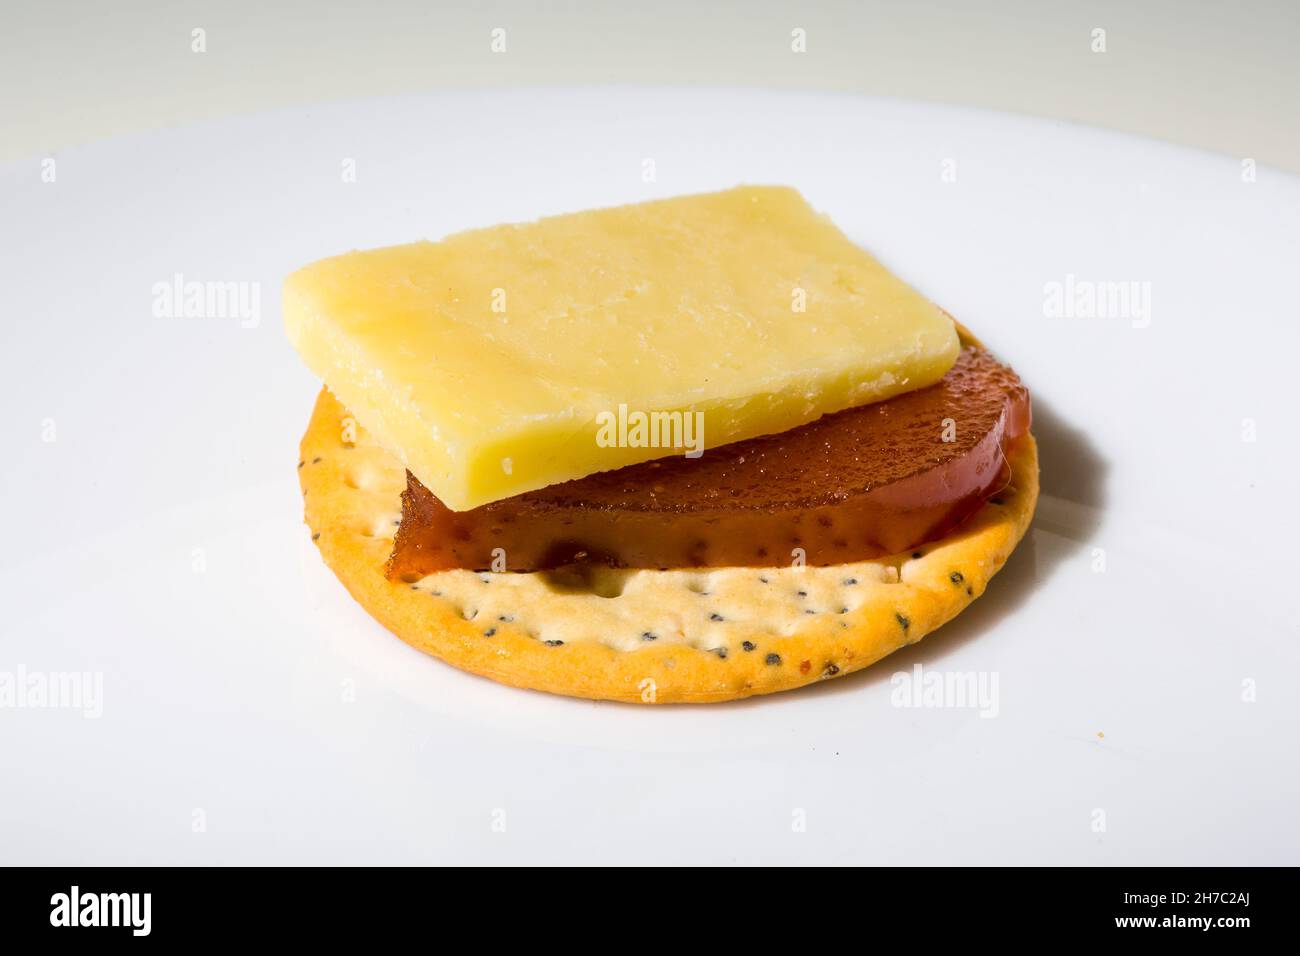 Cheese and a slice of quince jelly on a poppy and sesame seed biscuit. Stock Photo